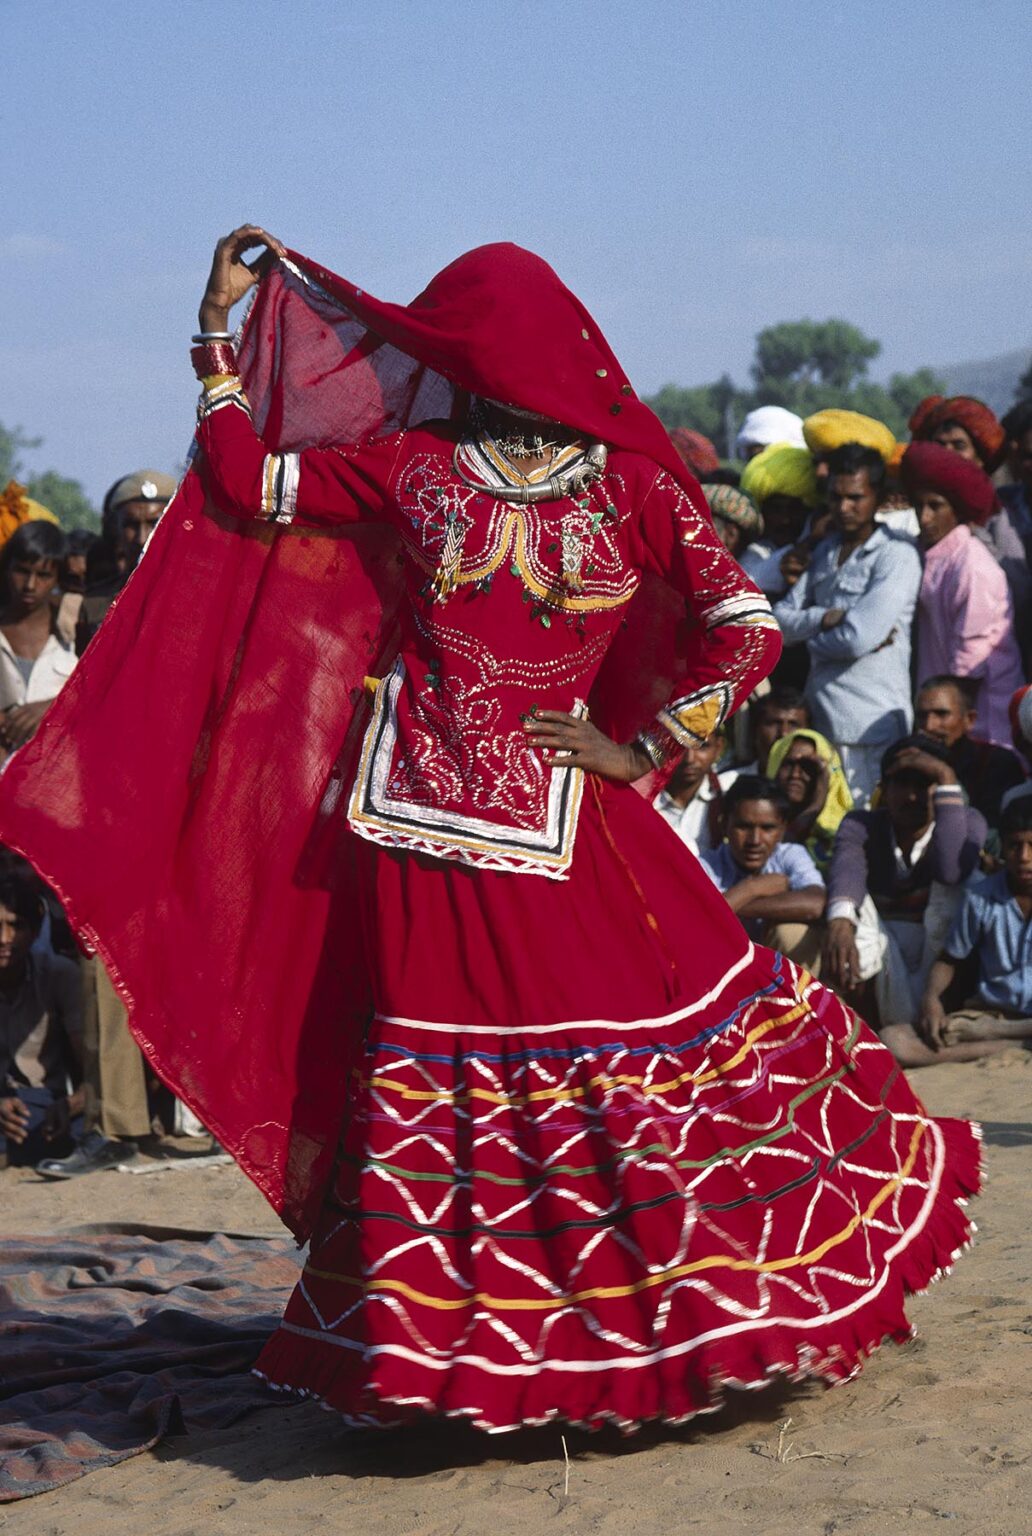 Portrait of a RAJASTHANI WOMAN during a TRADITIONAL DANCE with a RED VEIL at the PUSHKAR CAMEL FAIR - RAJASTHAN, INDIA